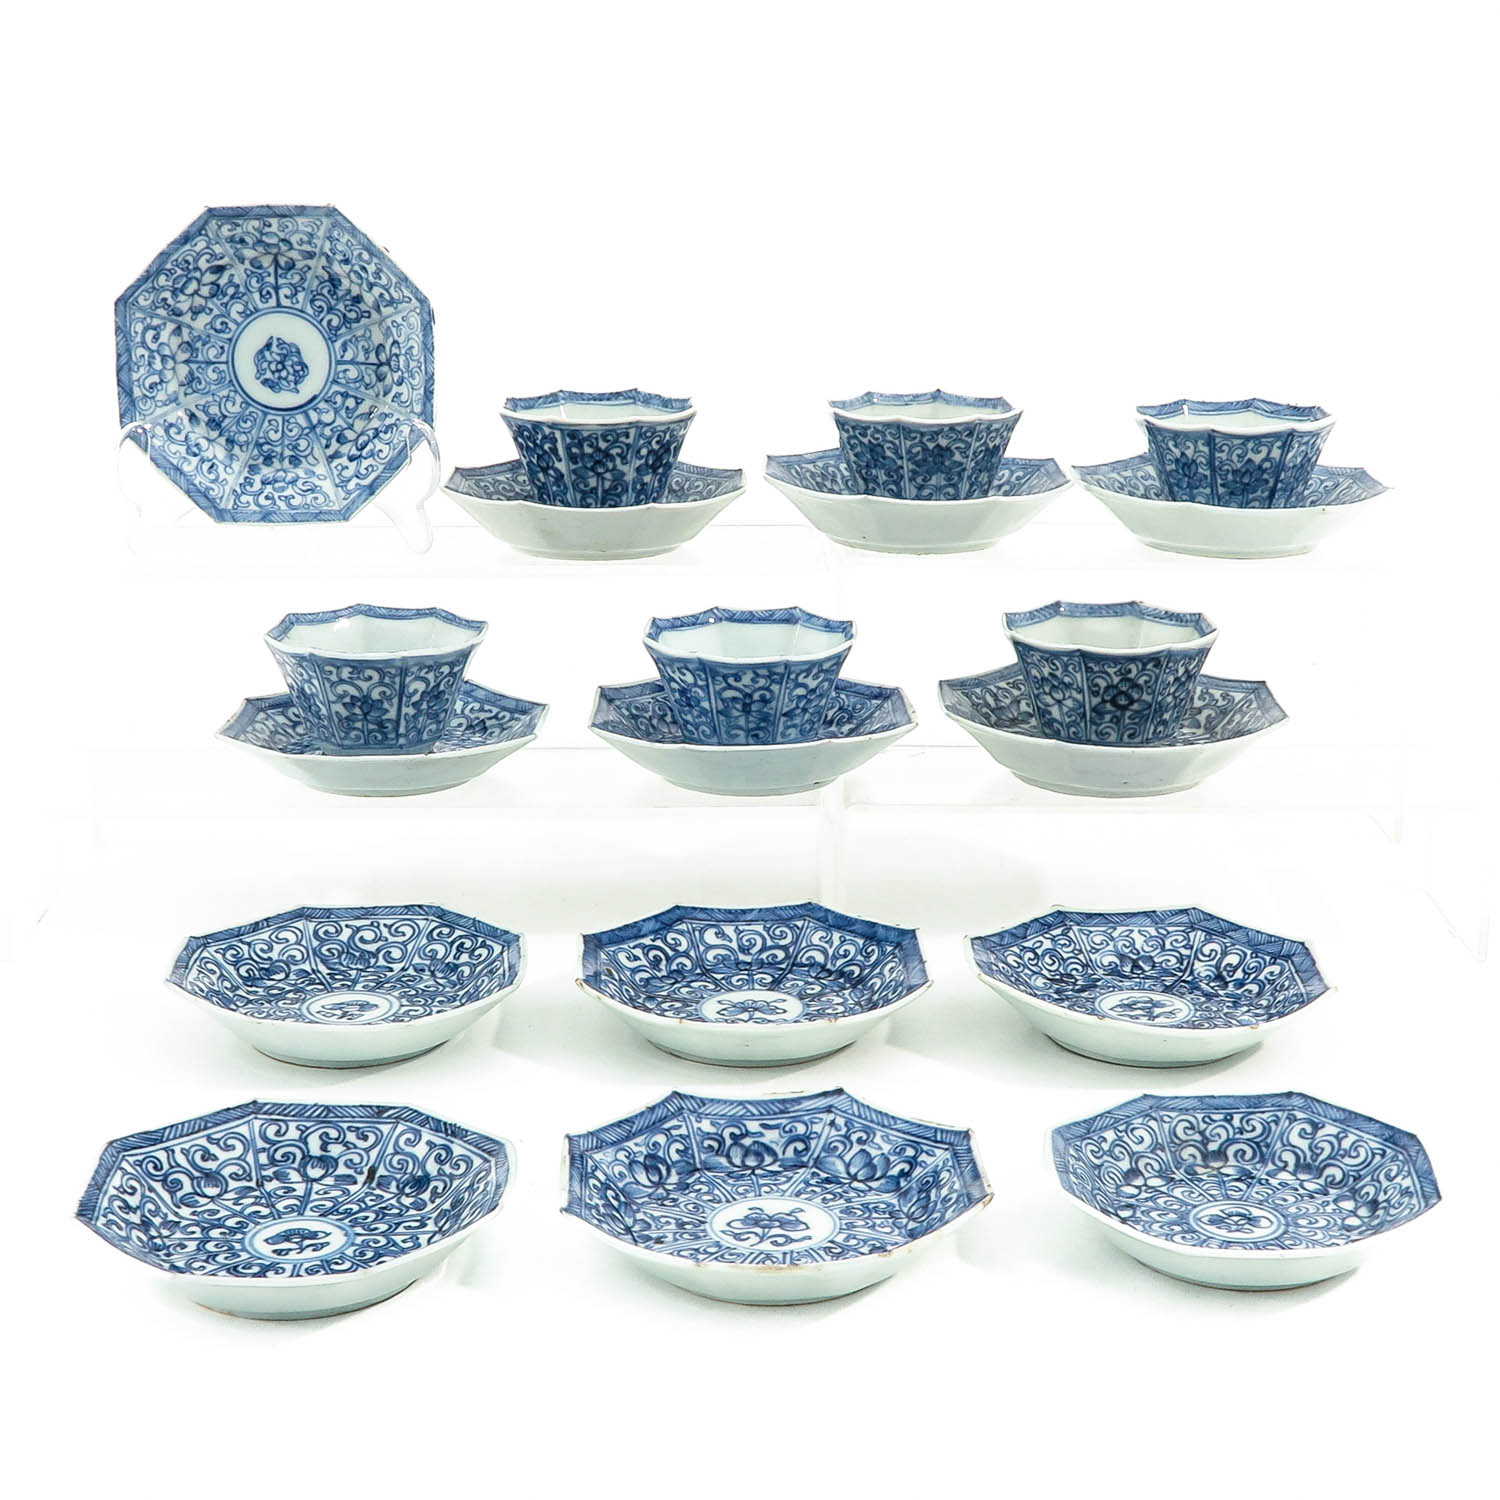 A Series of Blue and White Cups and Saucers